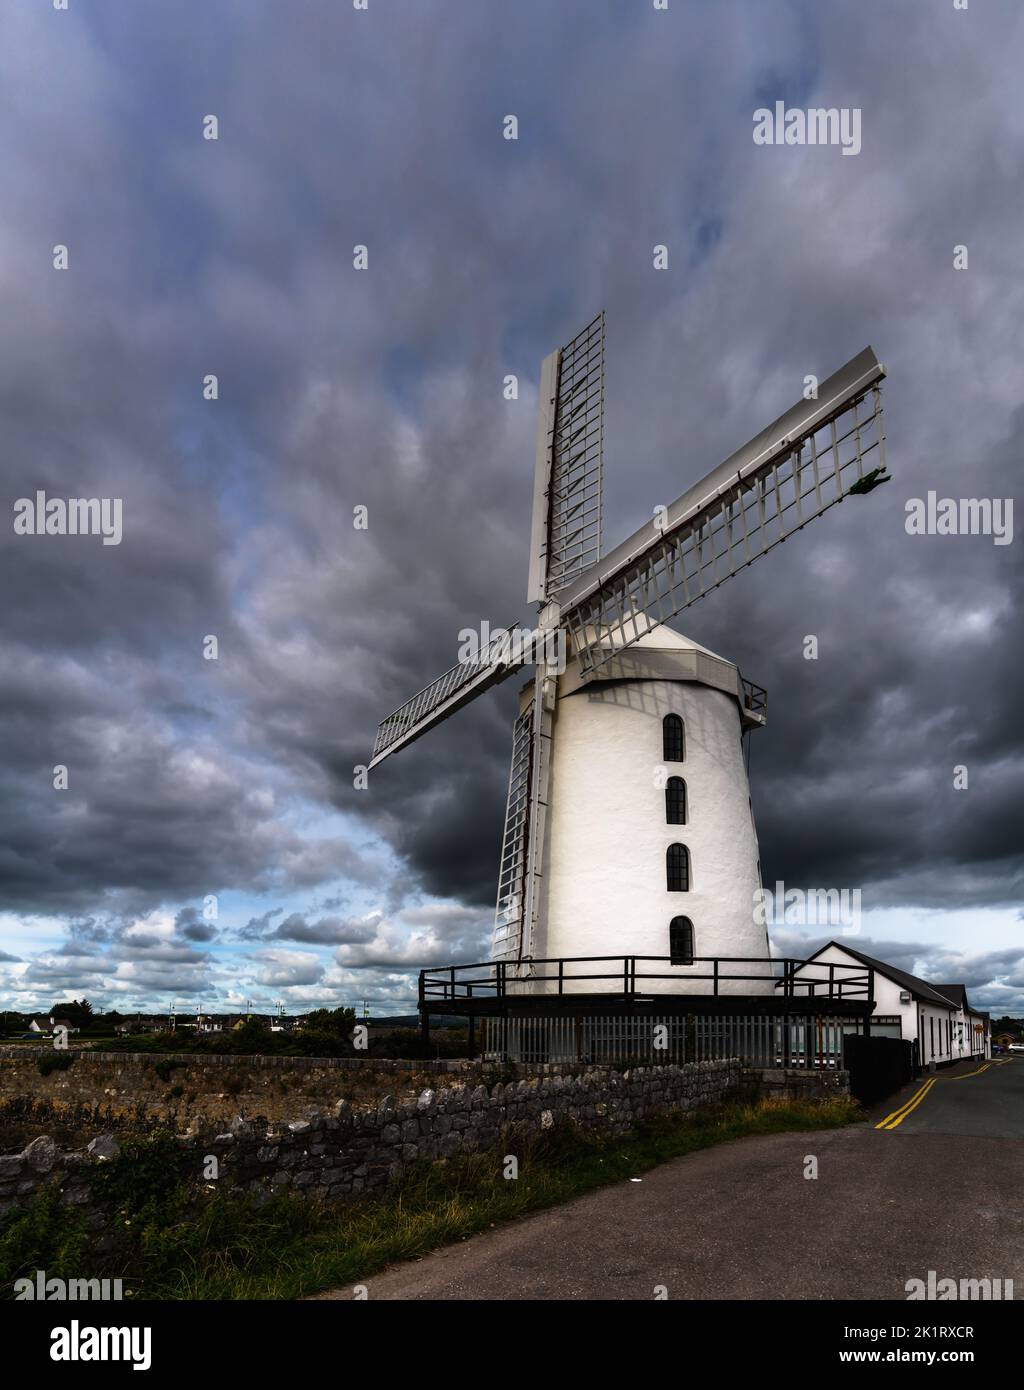 Blennerville, Ireland - 5 August, 2022: view of the historic Blennerville Windmill in Tralee Bay in western Ireland under stormy skies Stock Photo